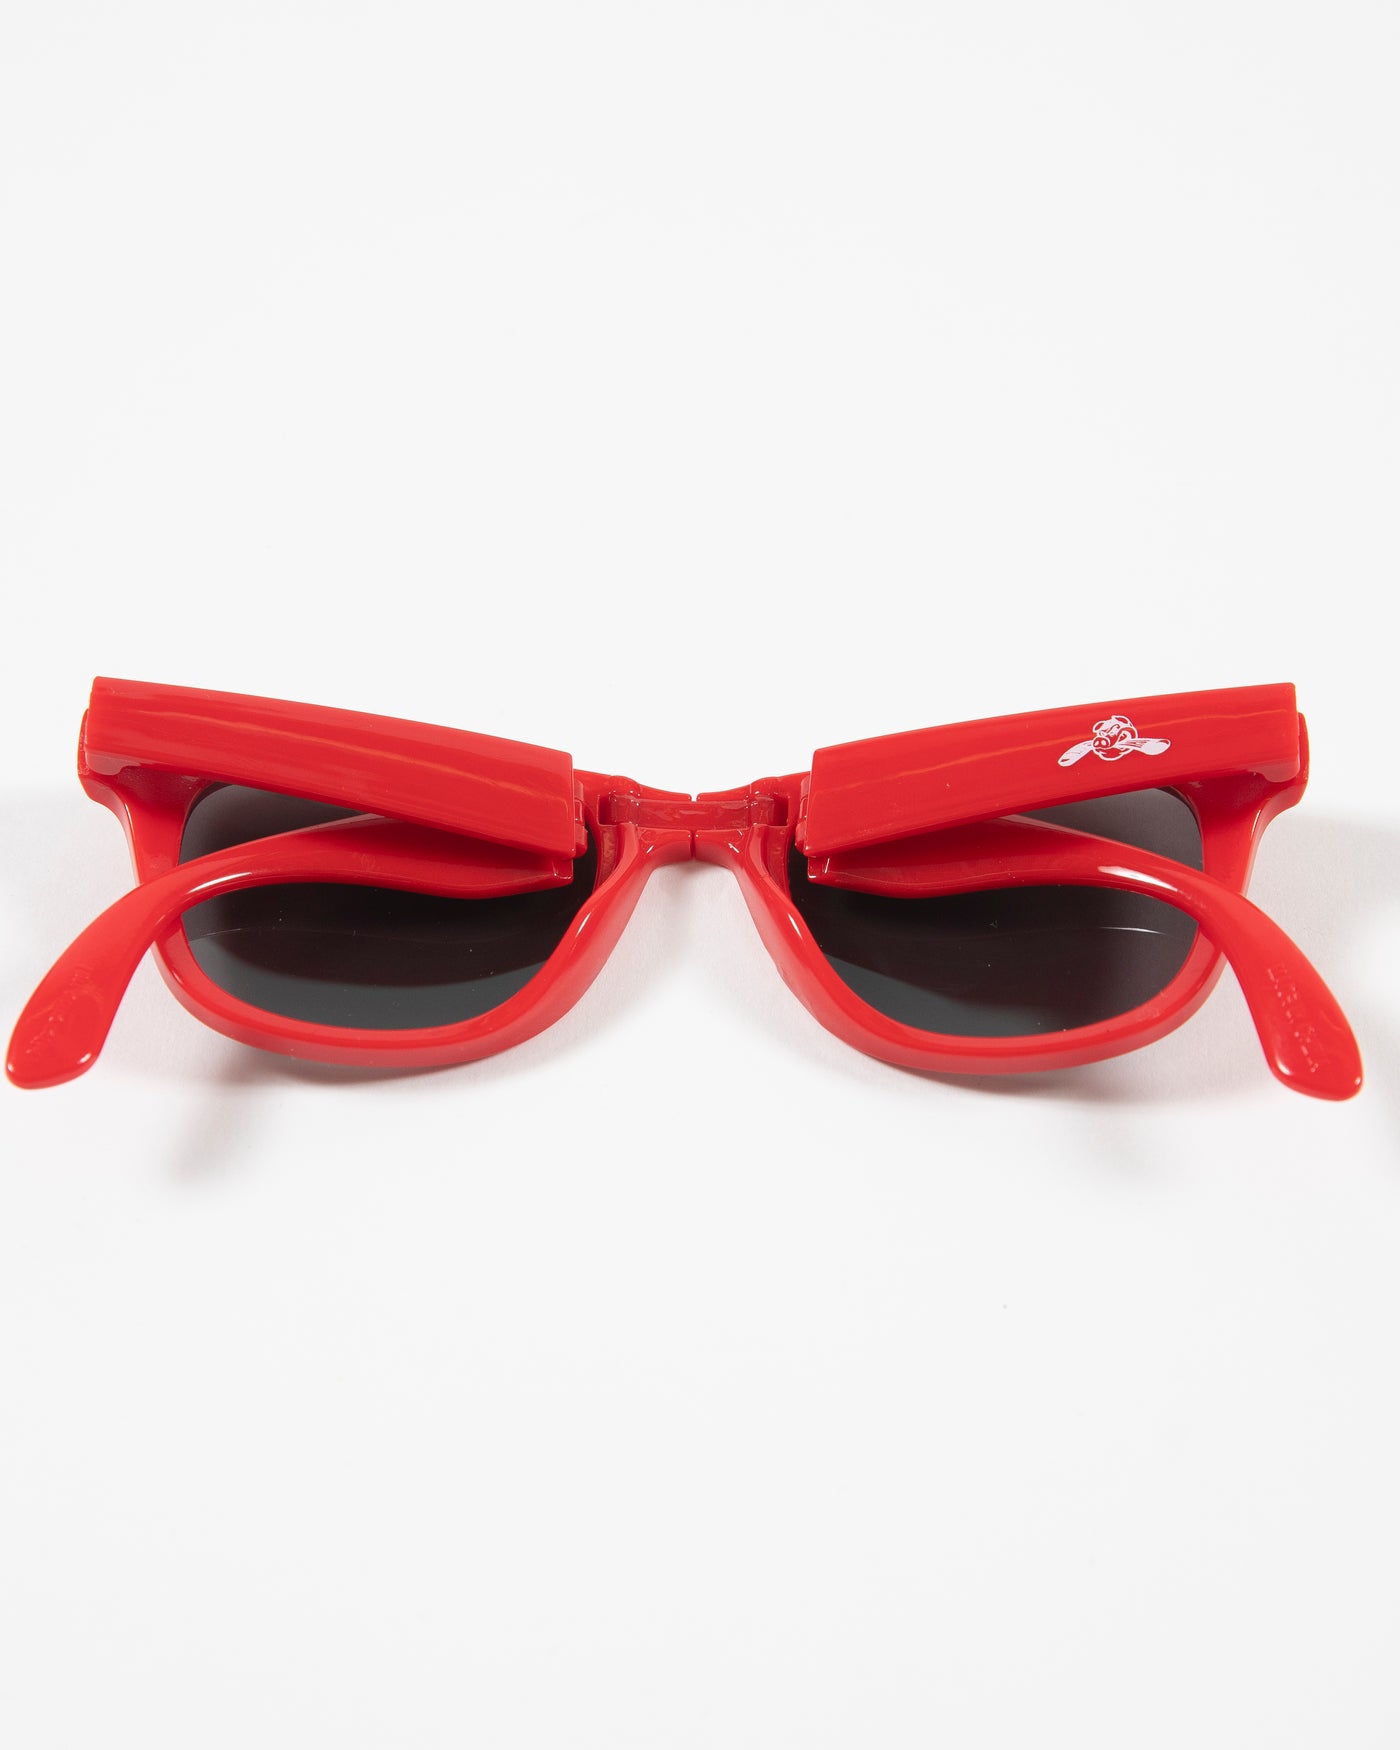 Rockford IceHogs Red Foldable Sunglasses